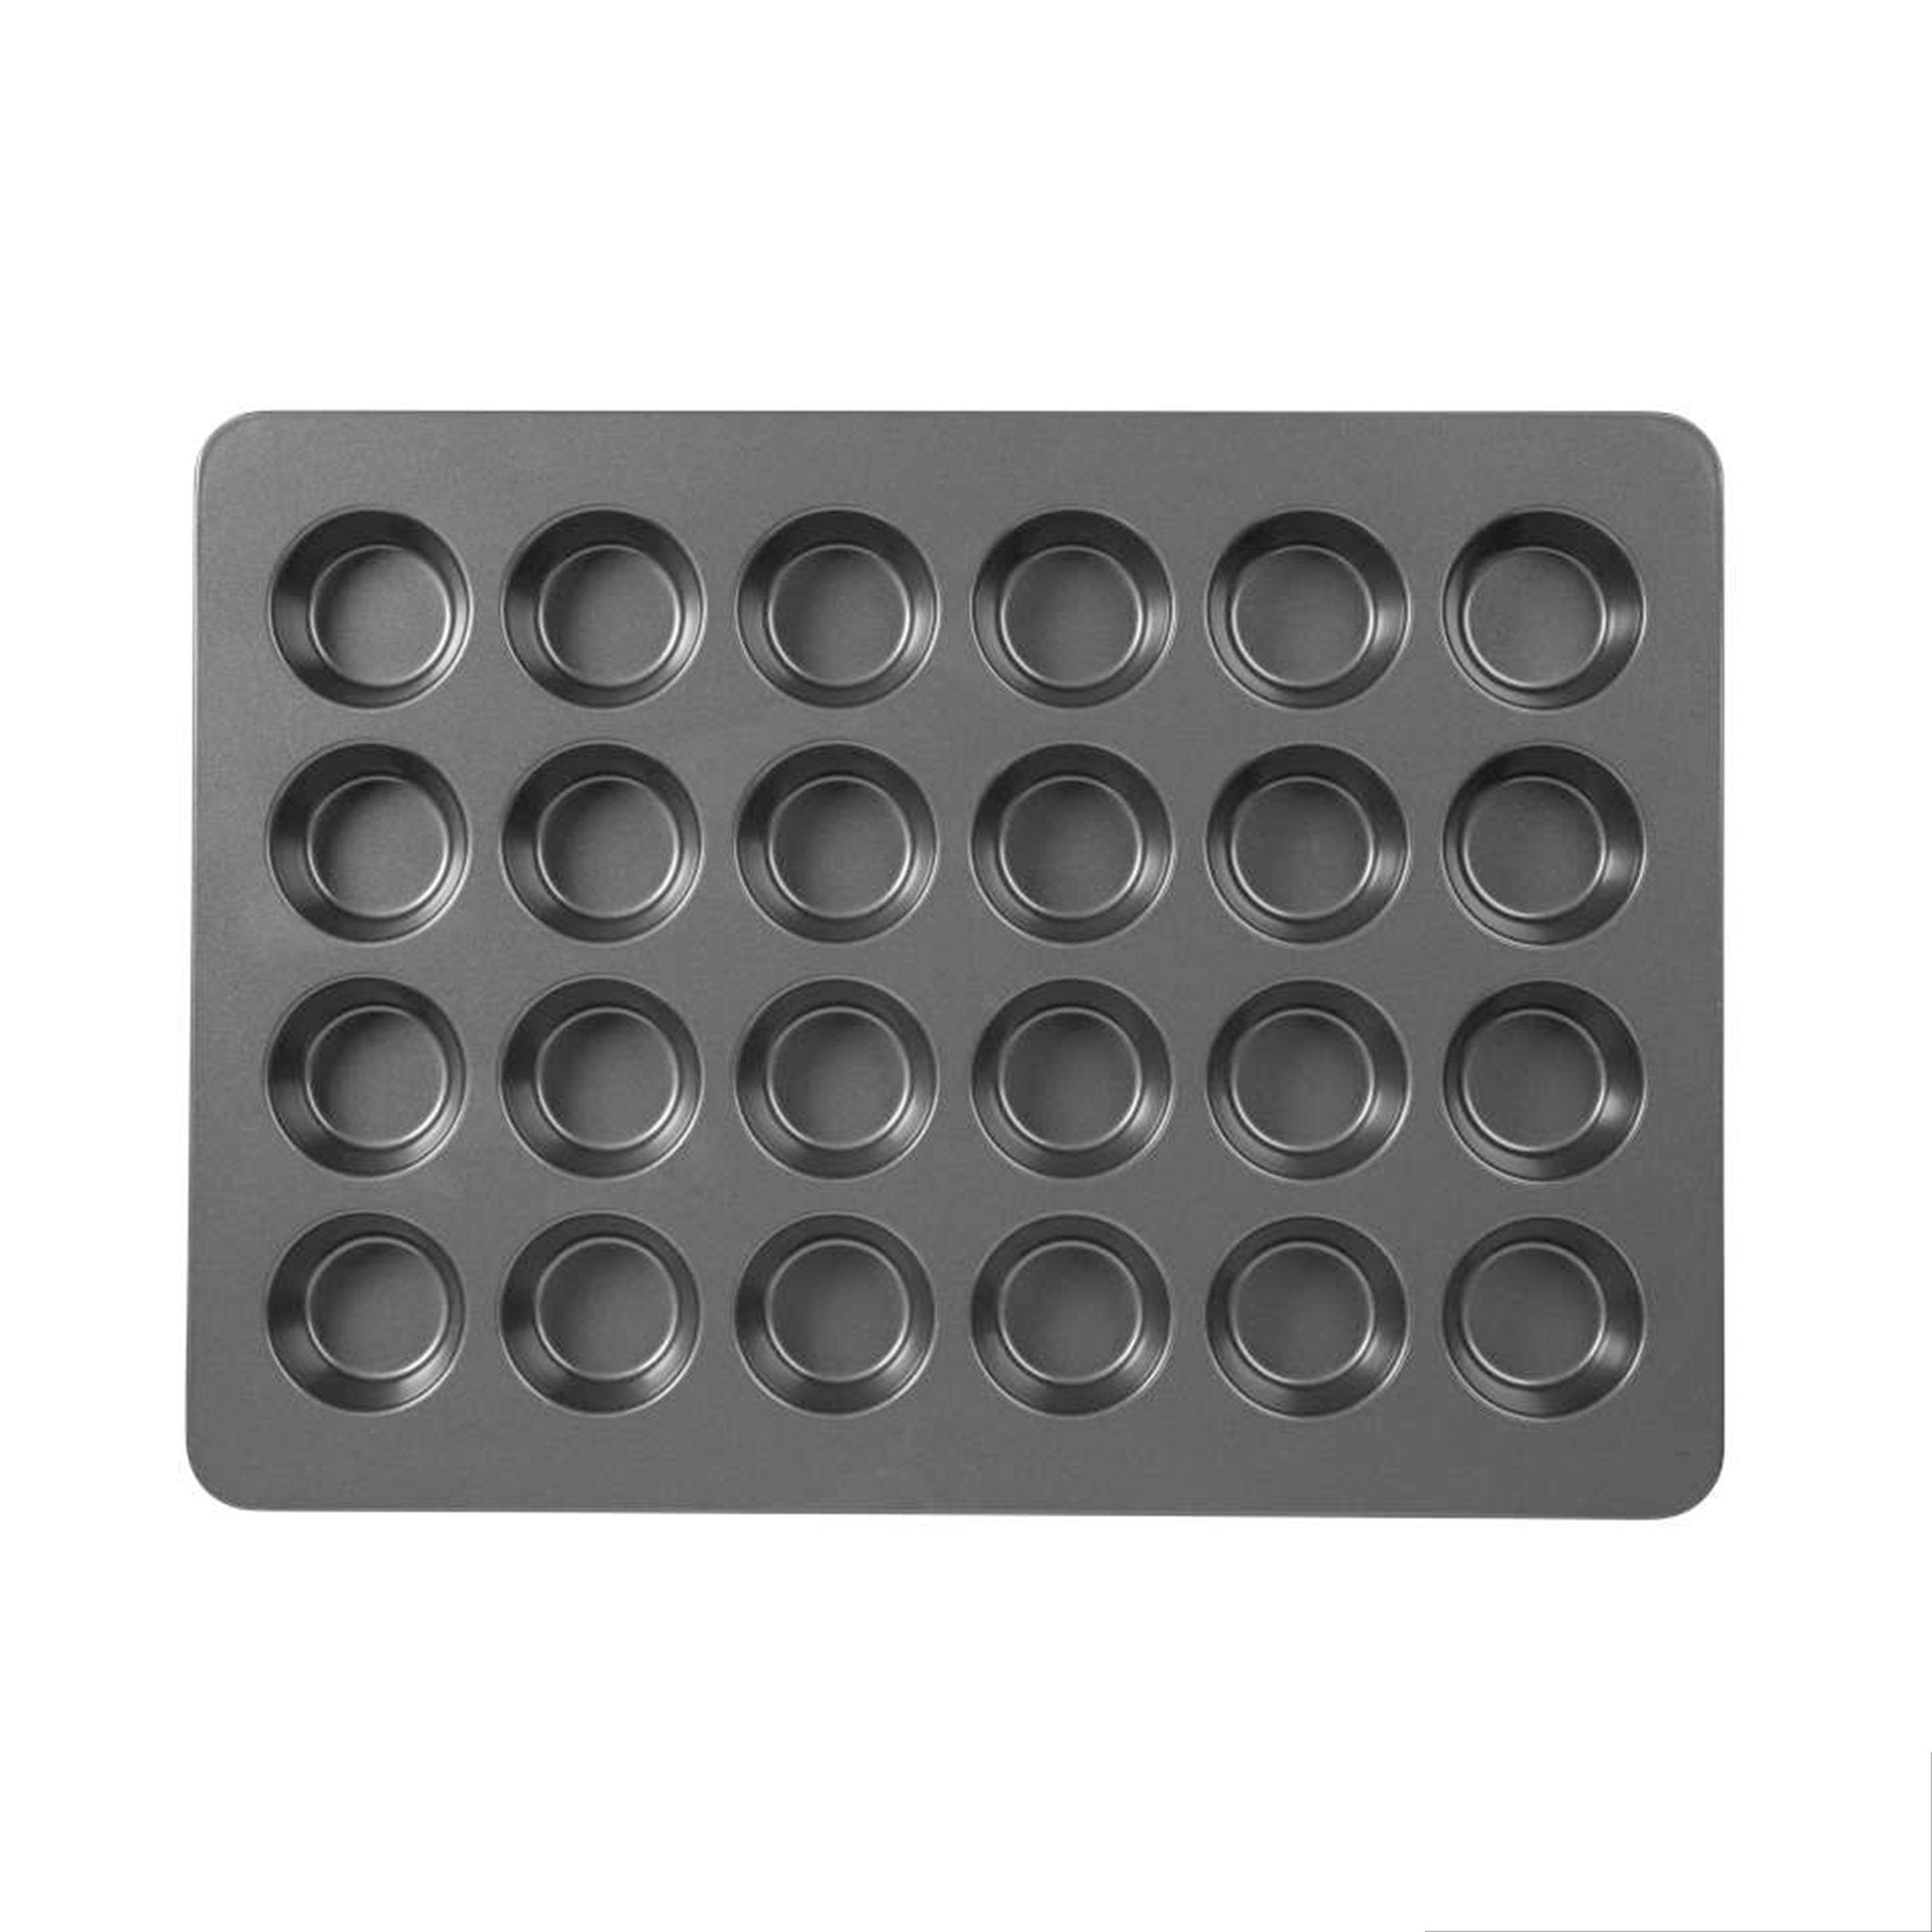 2338 Muffin Cupcake Mould Bakeware Pan Tray Mould Maker 24 Slot Round Shape - SkyShopy